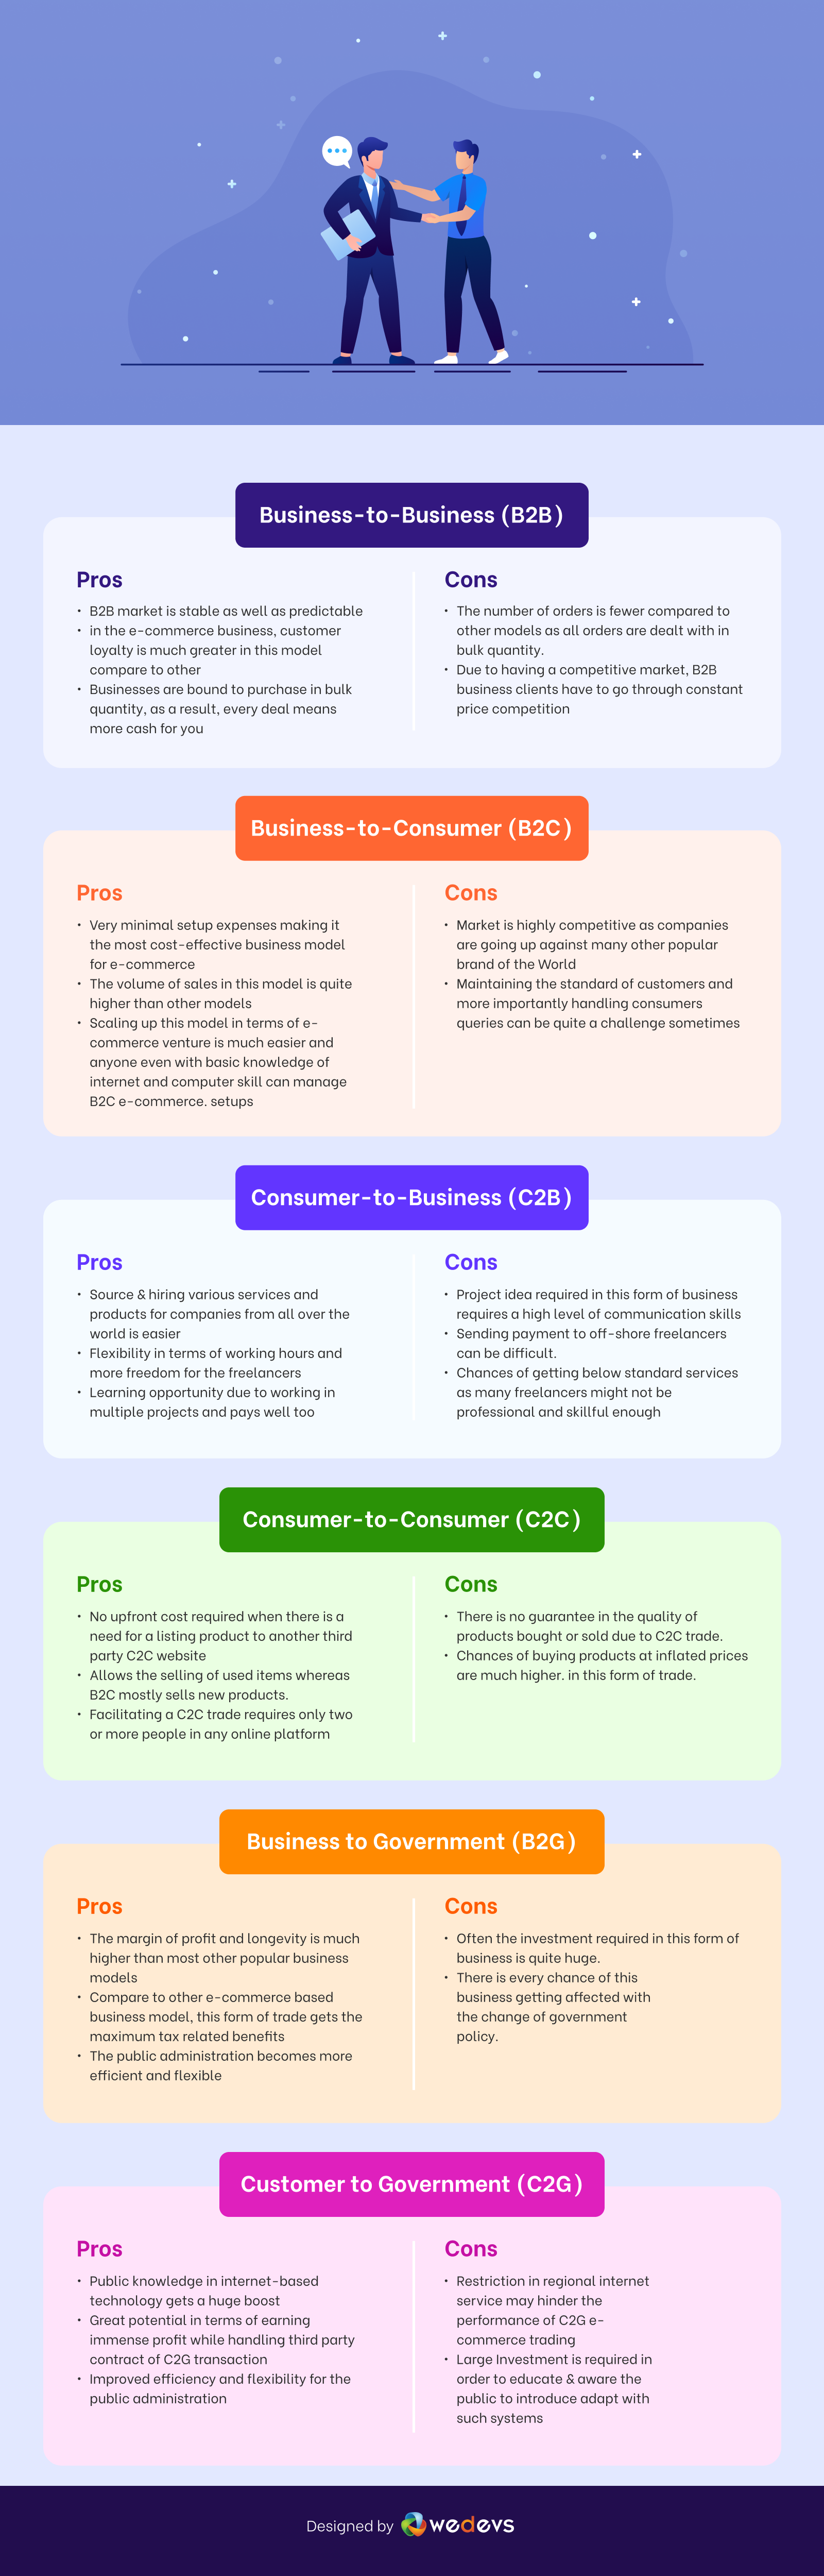 An illustration to business models for eCommerce